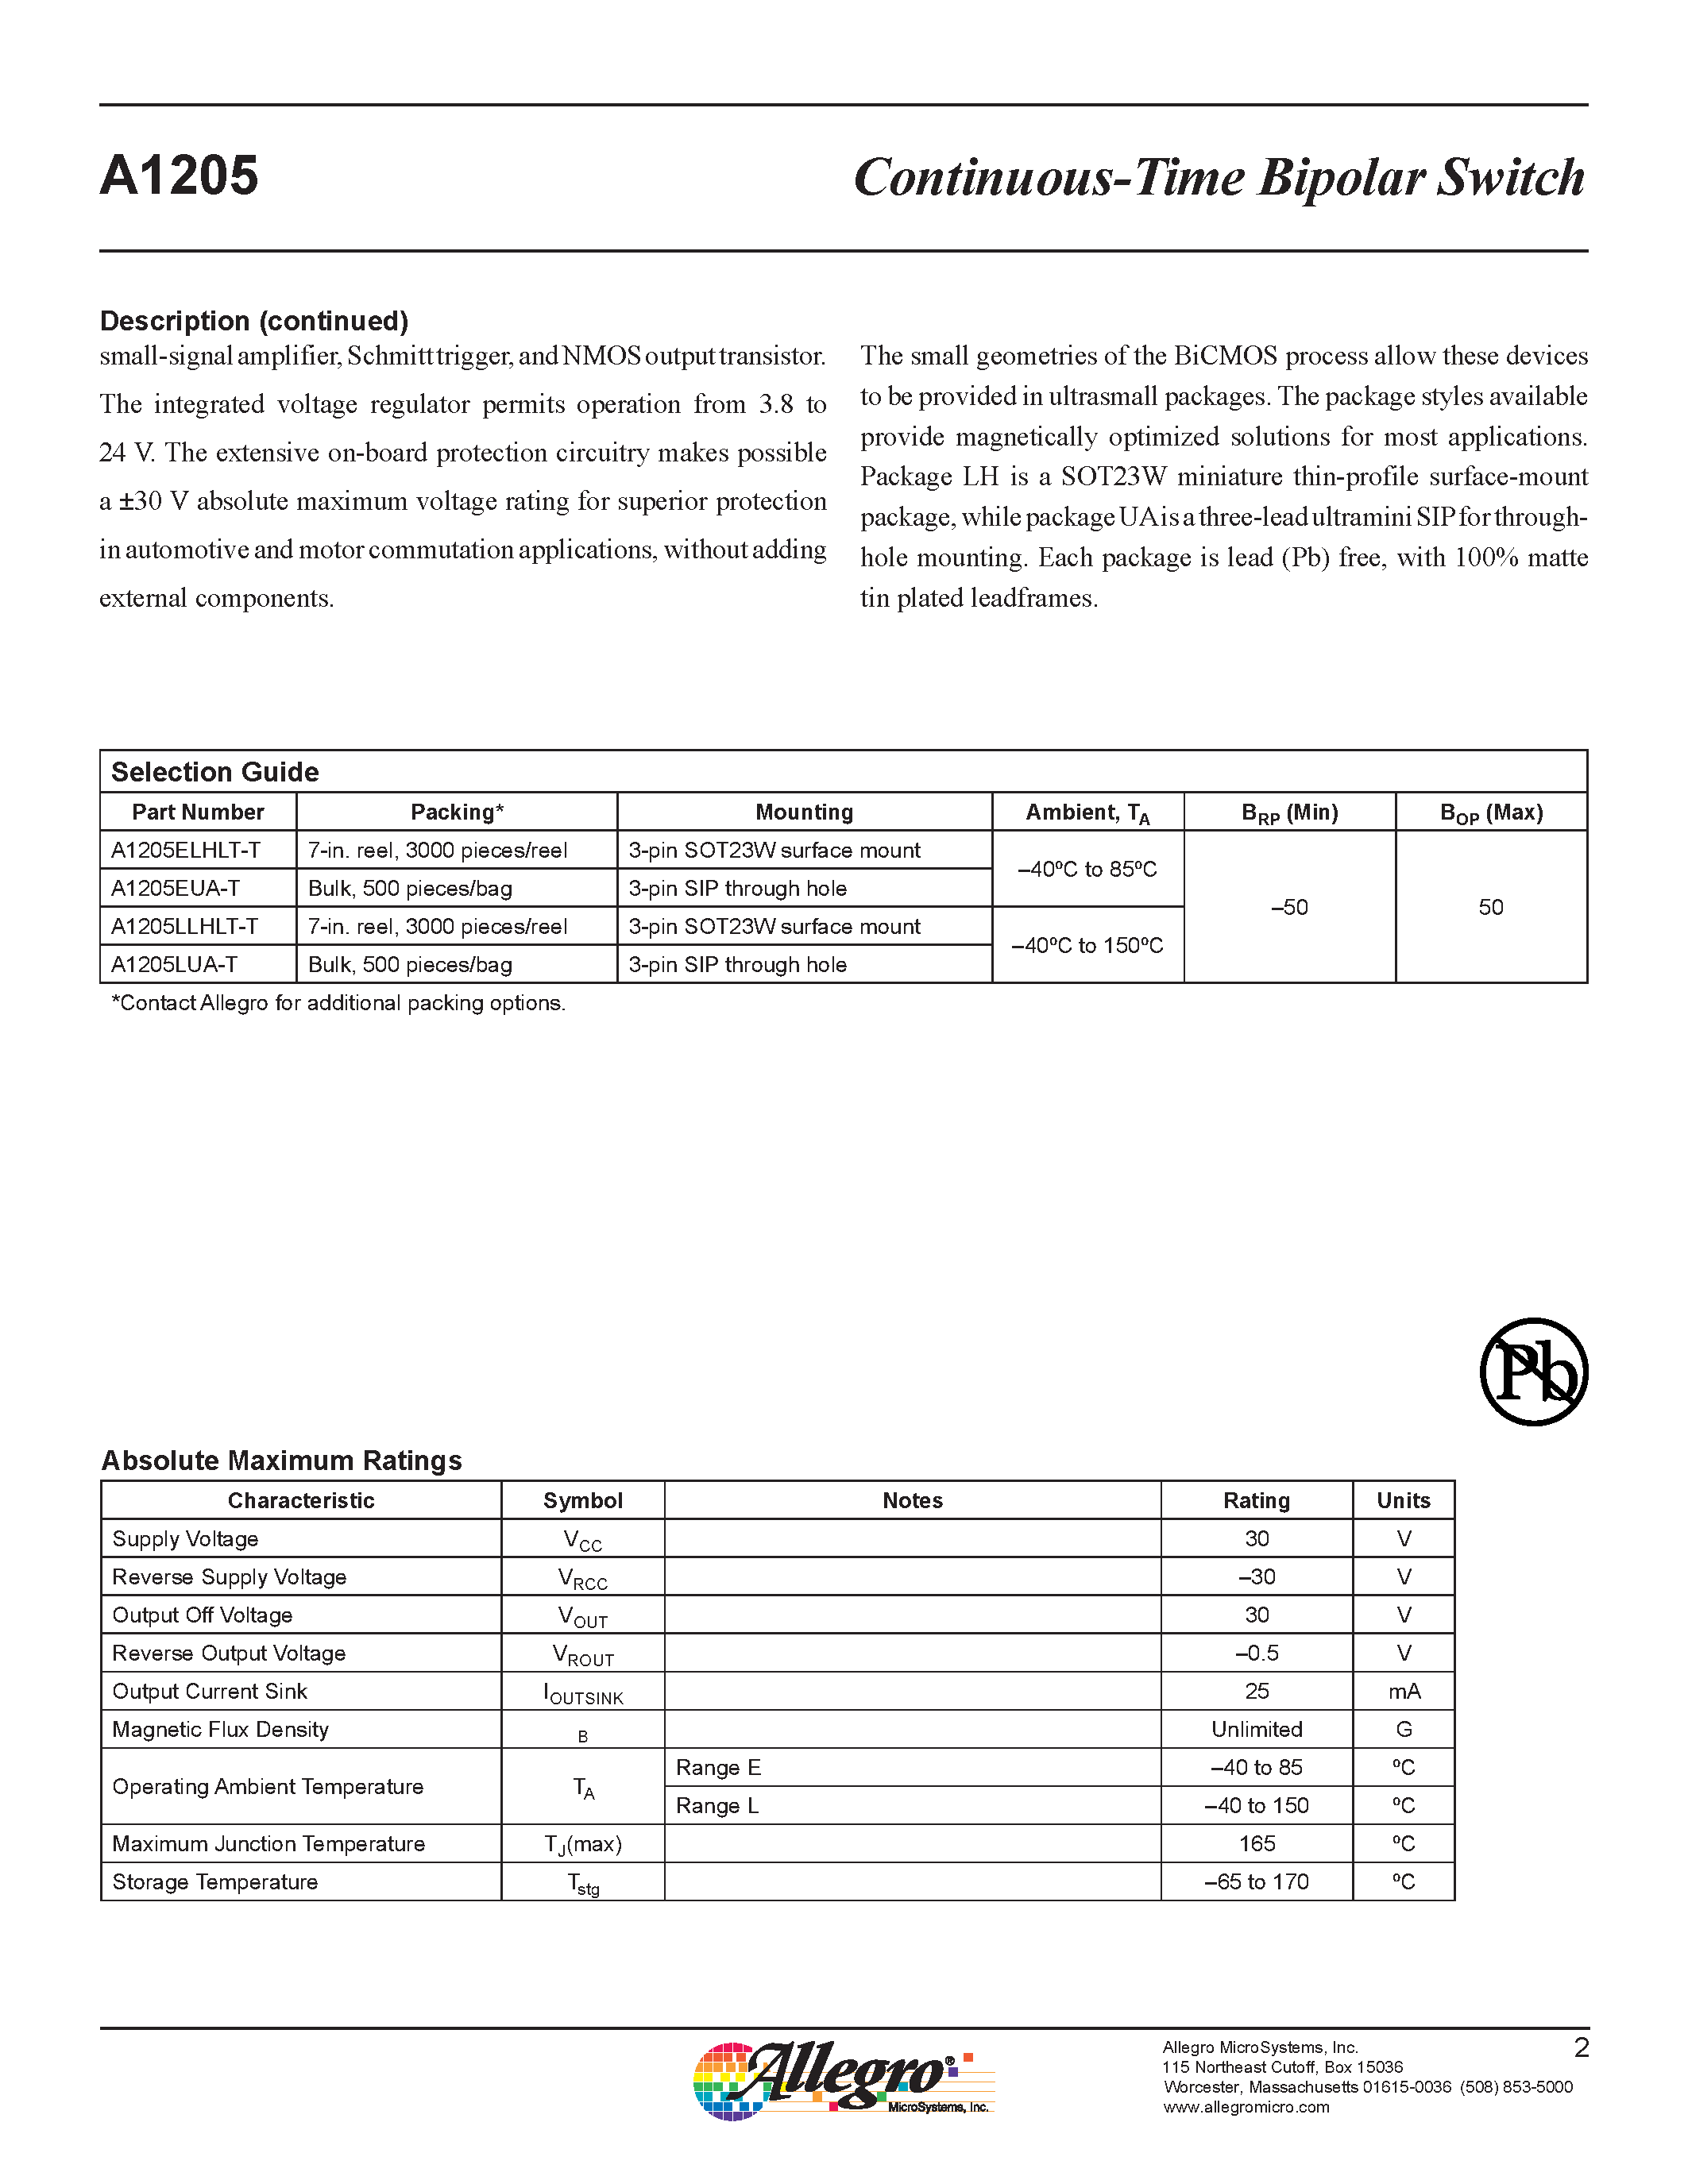 Datasheet A1205 - Continuous-Time Bipolar Switch page 2